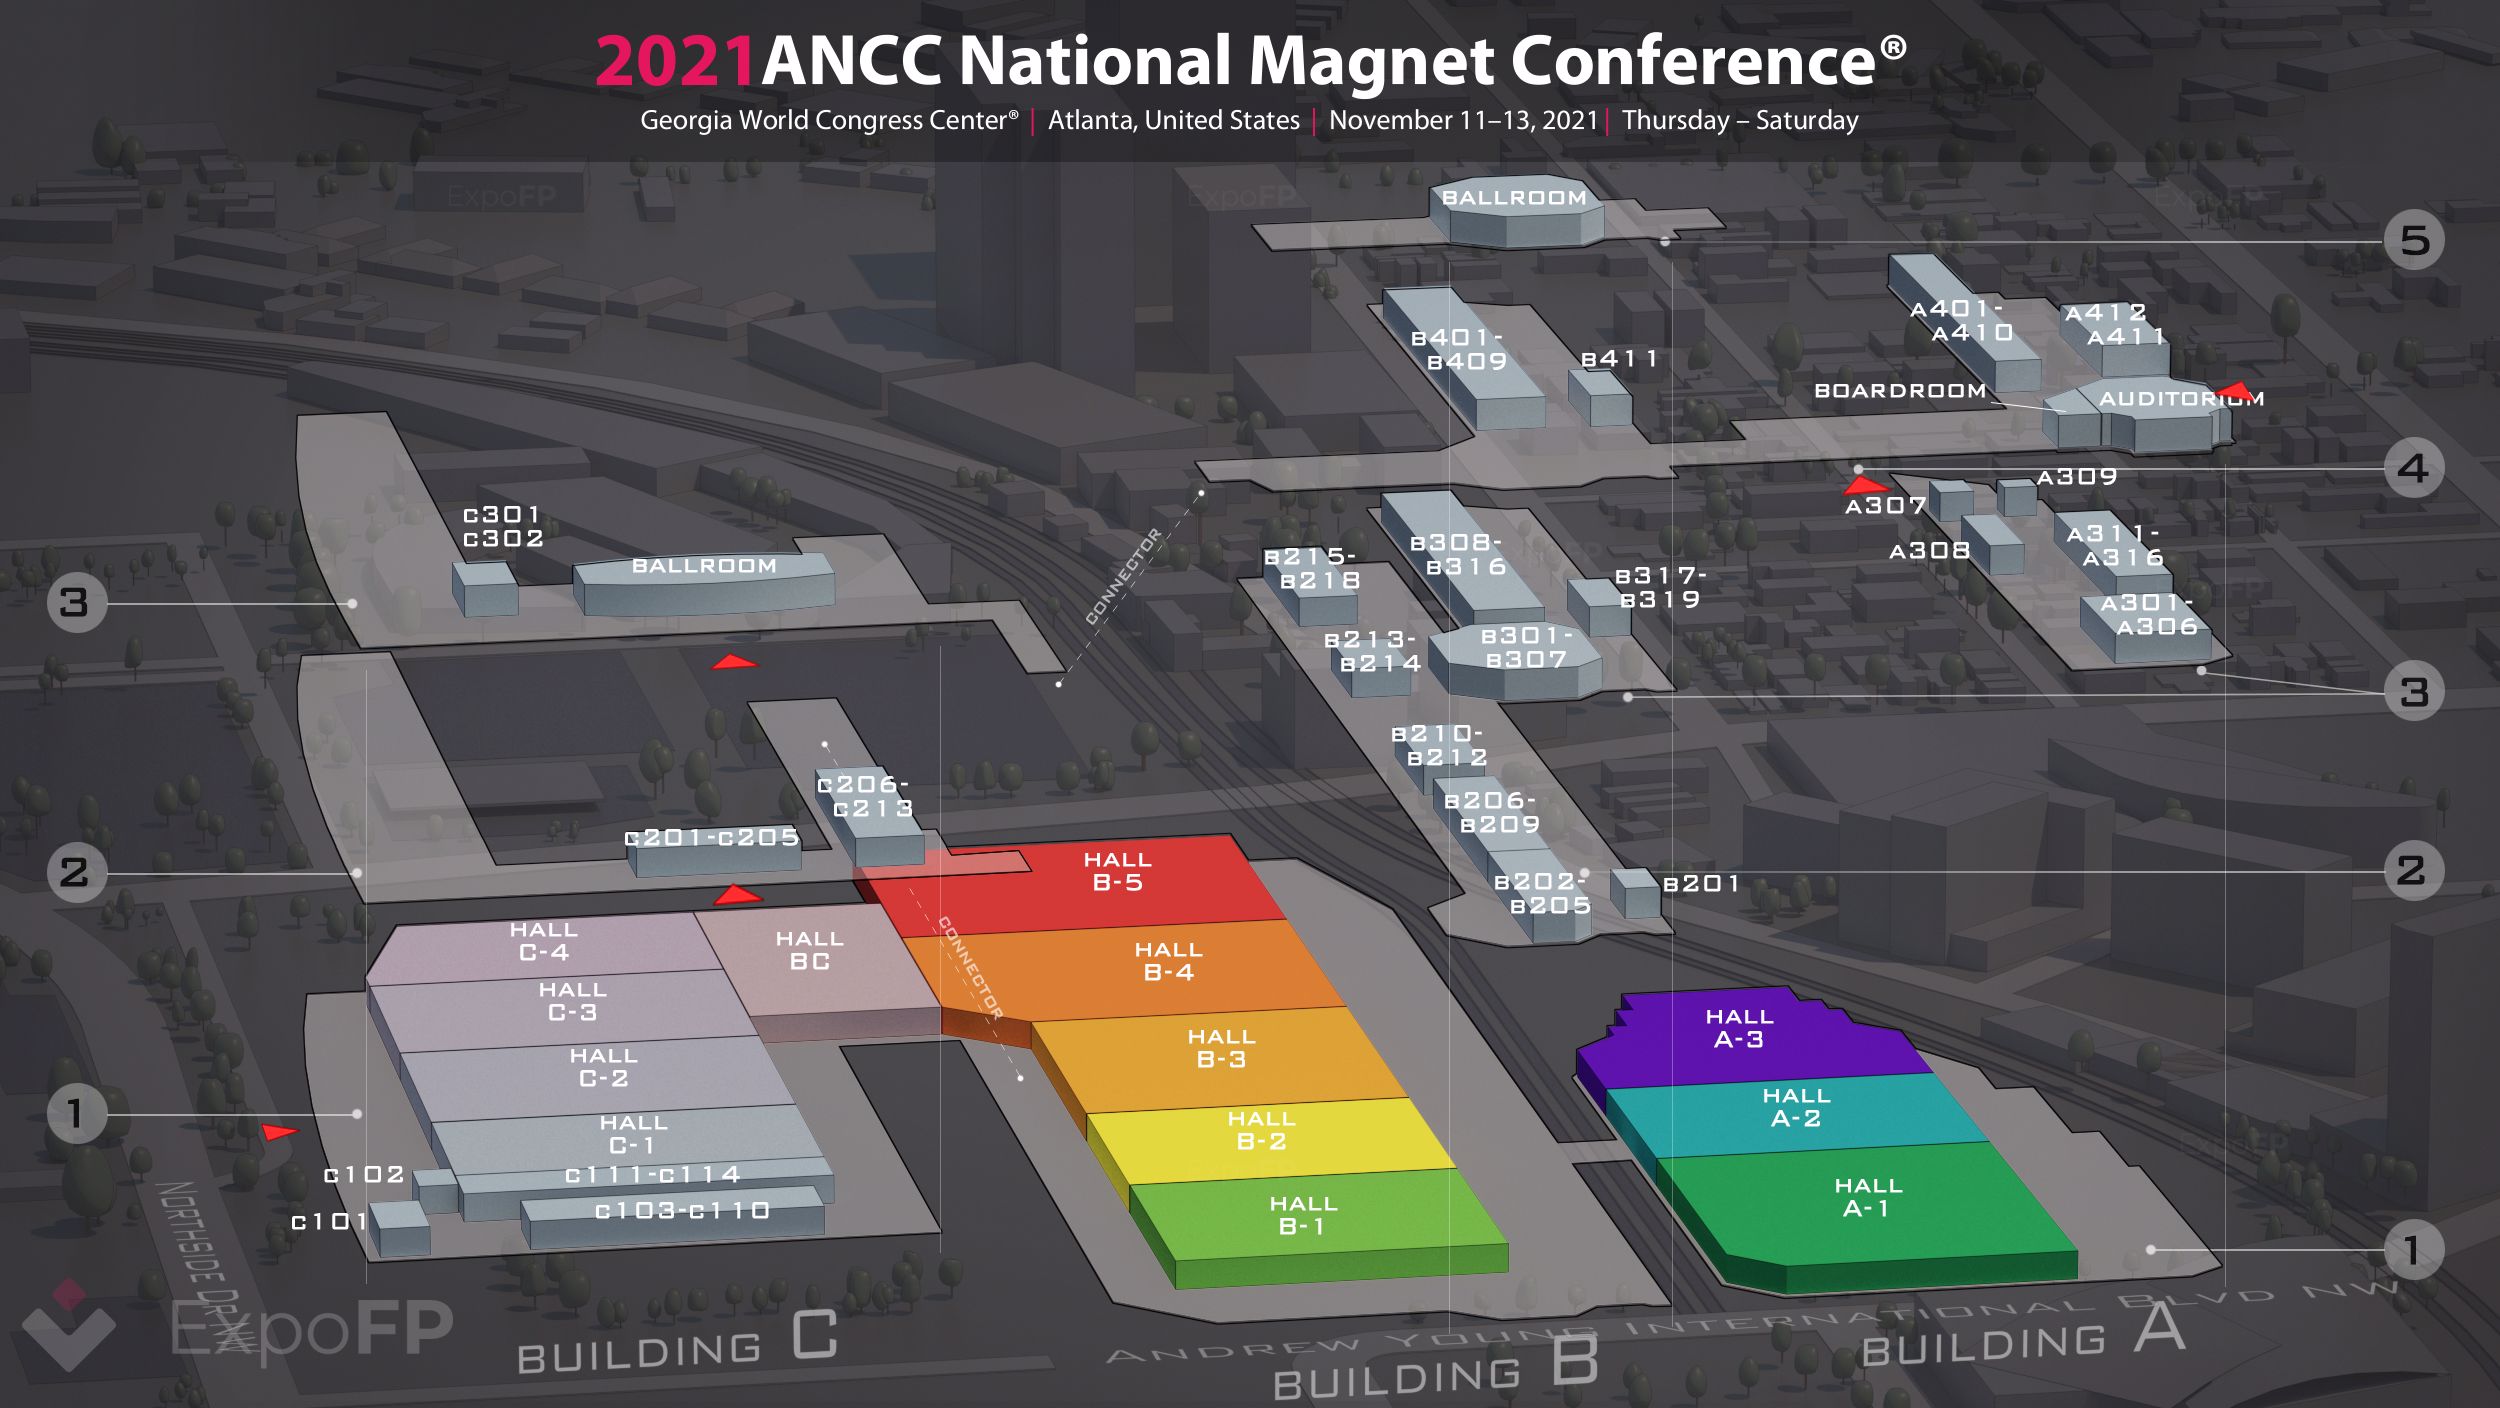 ANCC National Magnet Conference 2021 in Georgia World Congress Center